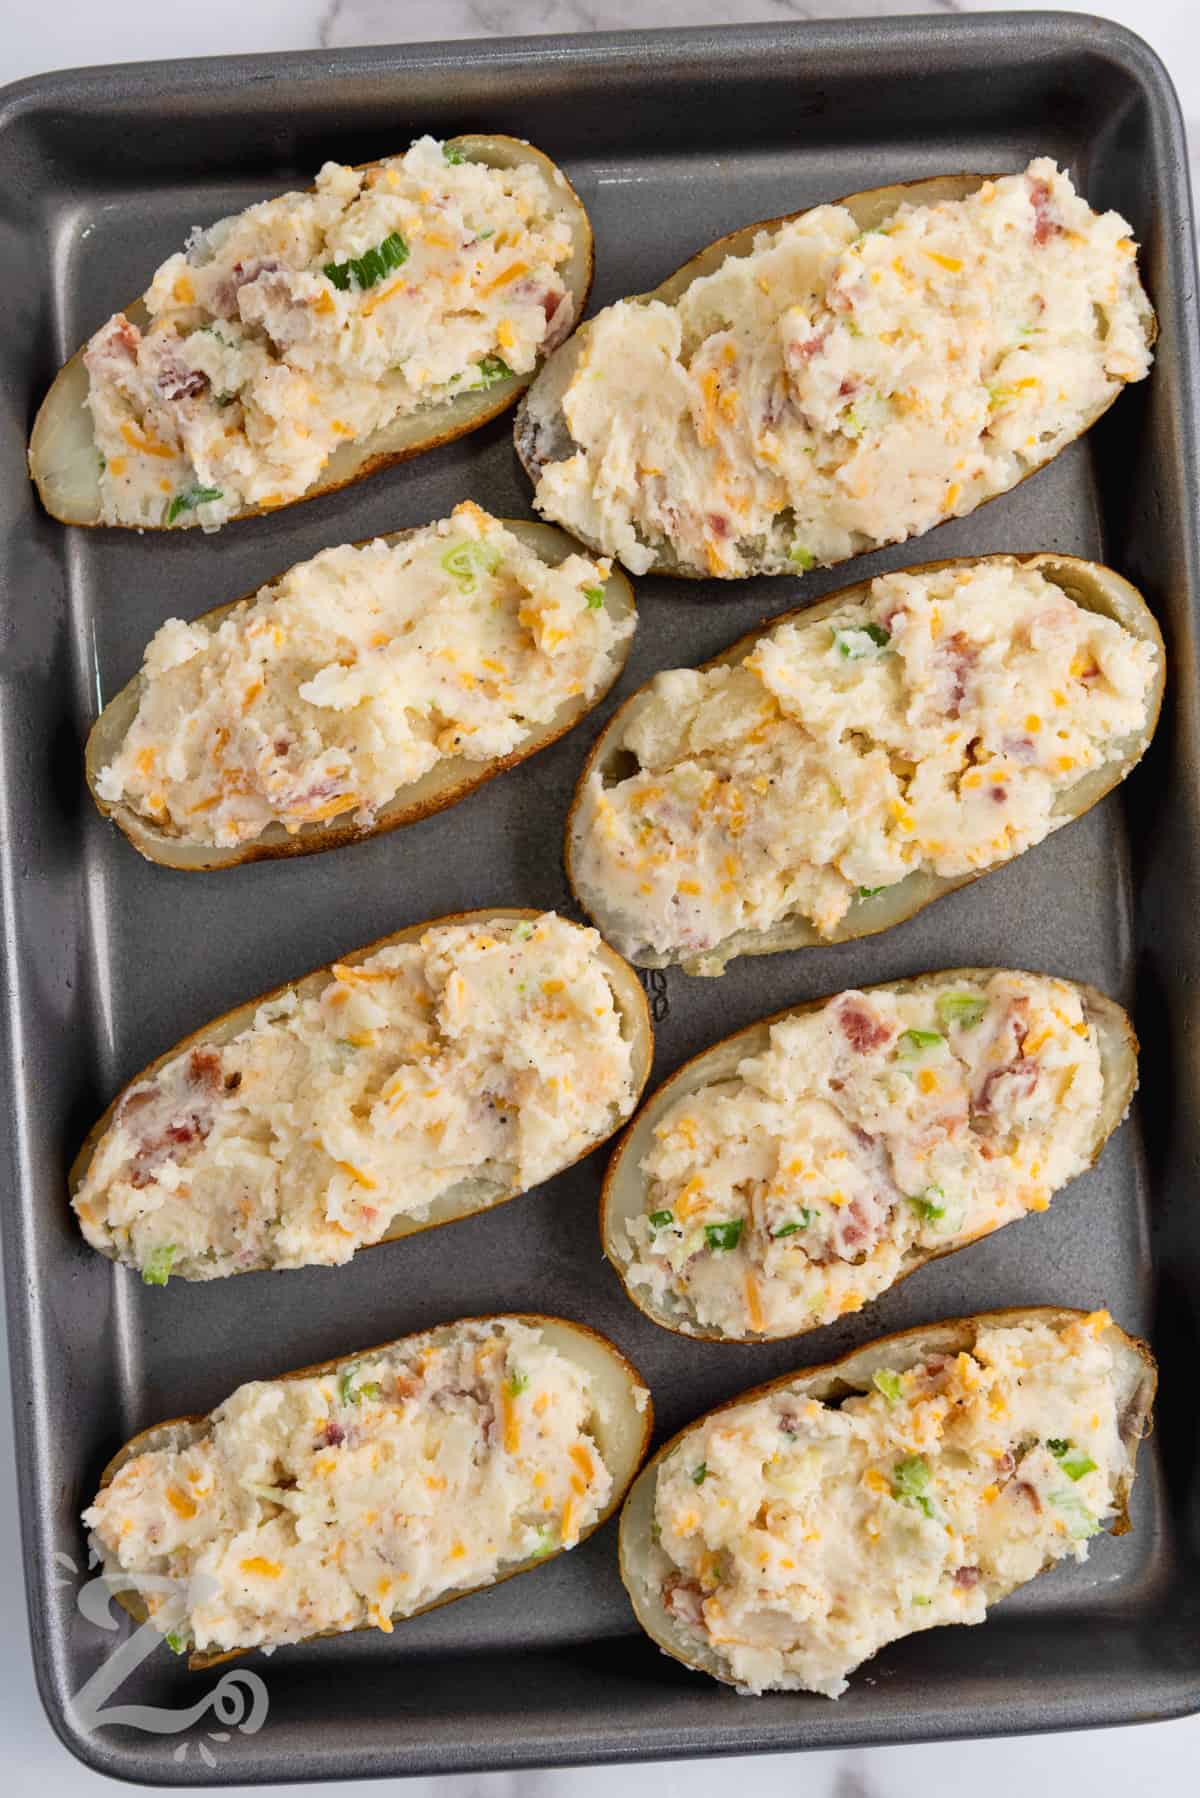 twice baked potatoes stuffed with potato mixture before being baked